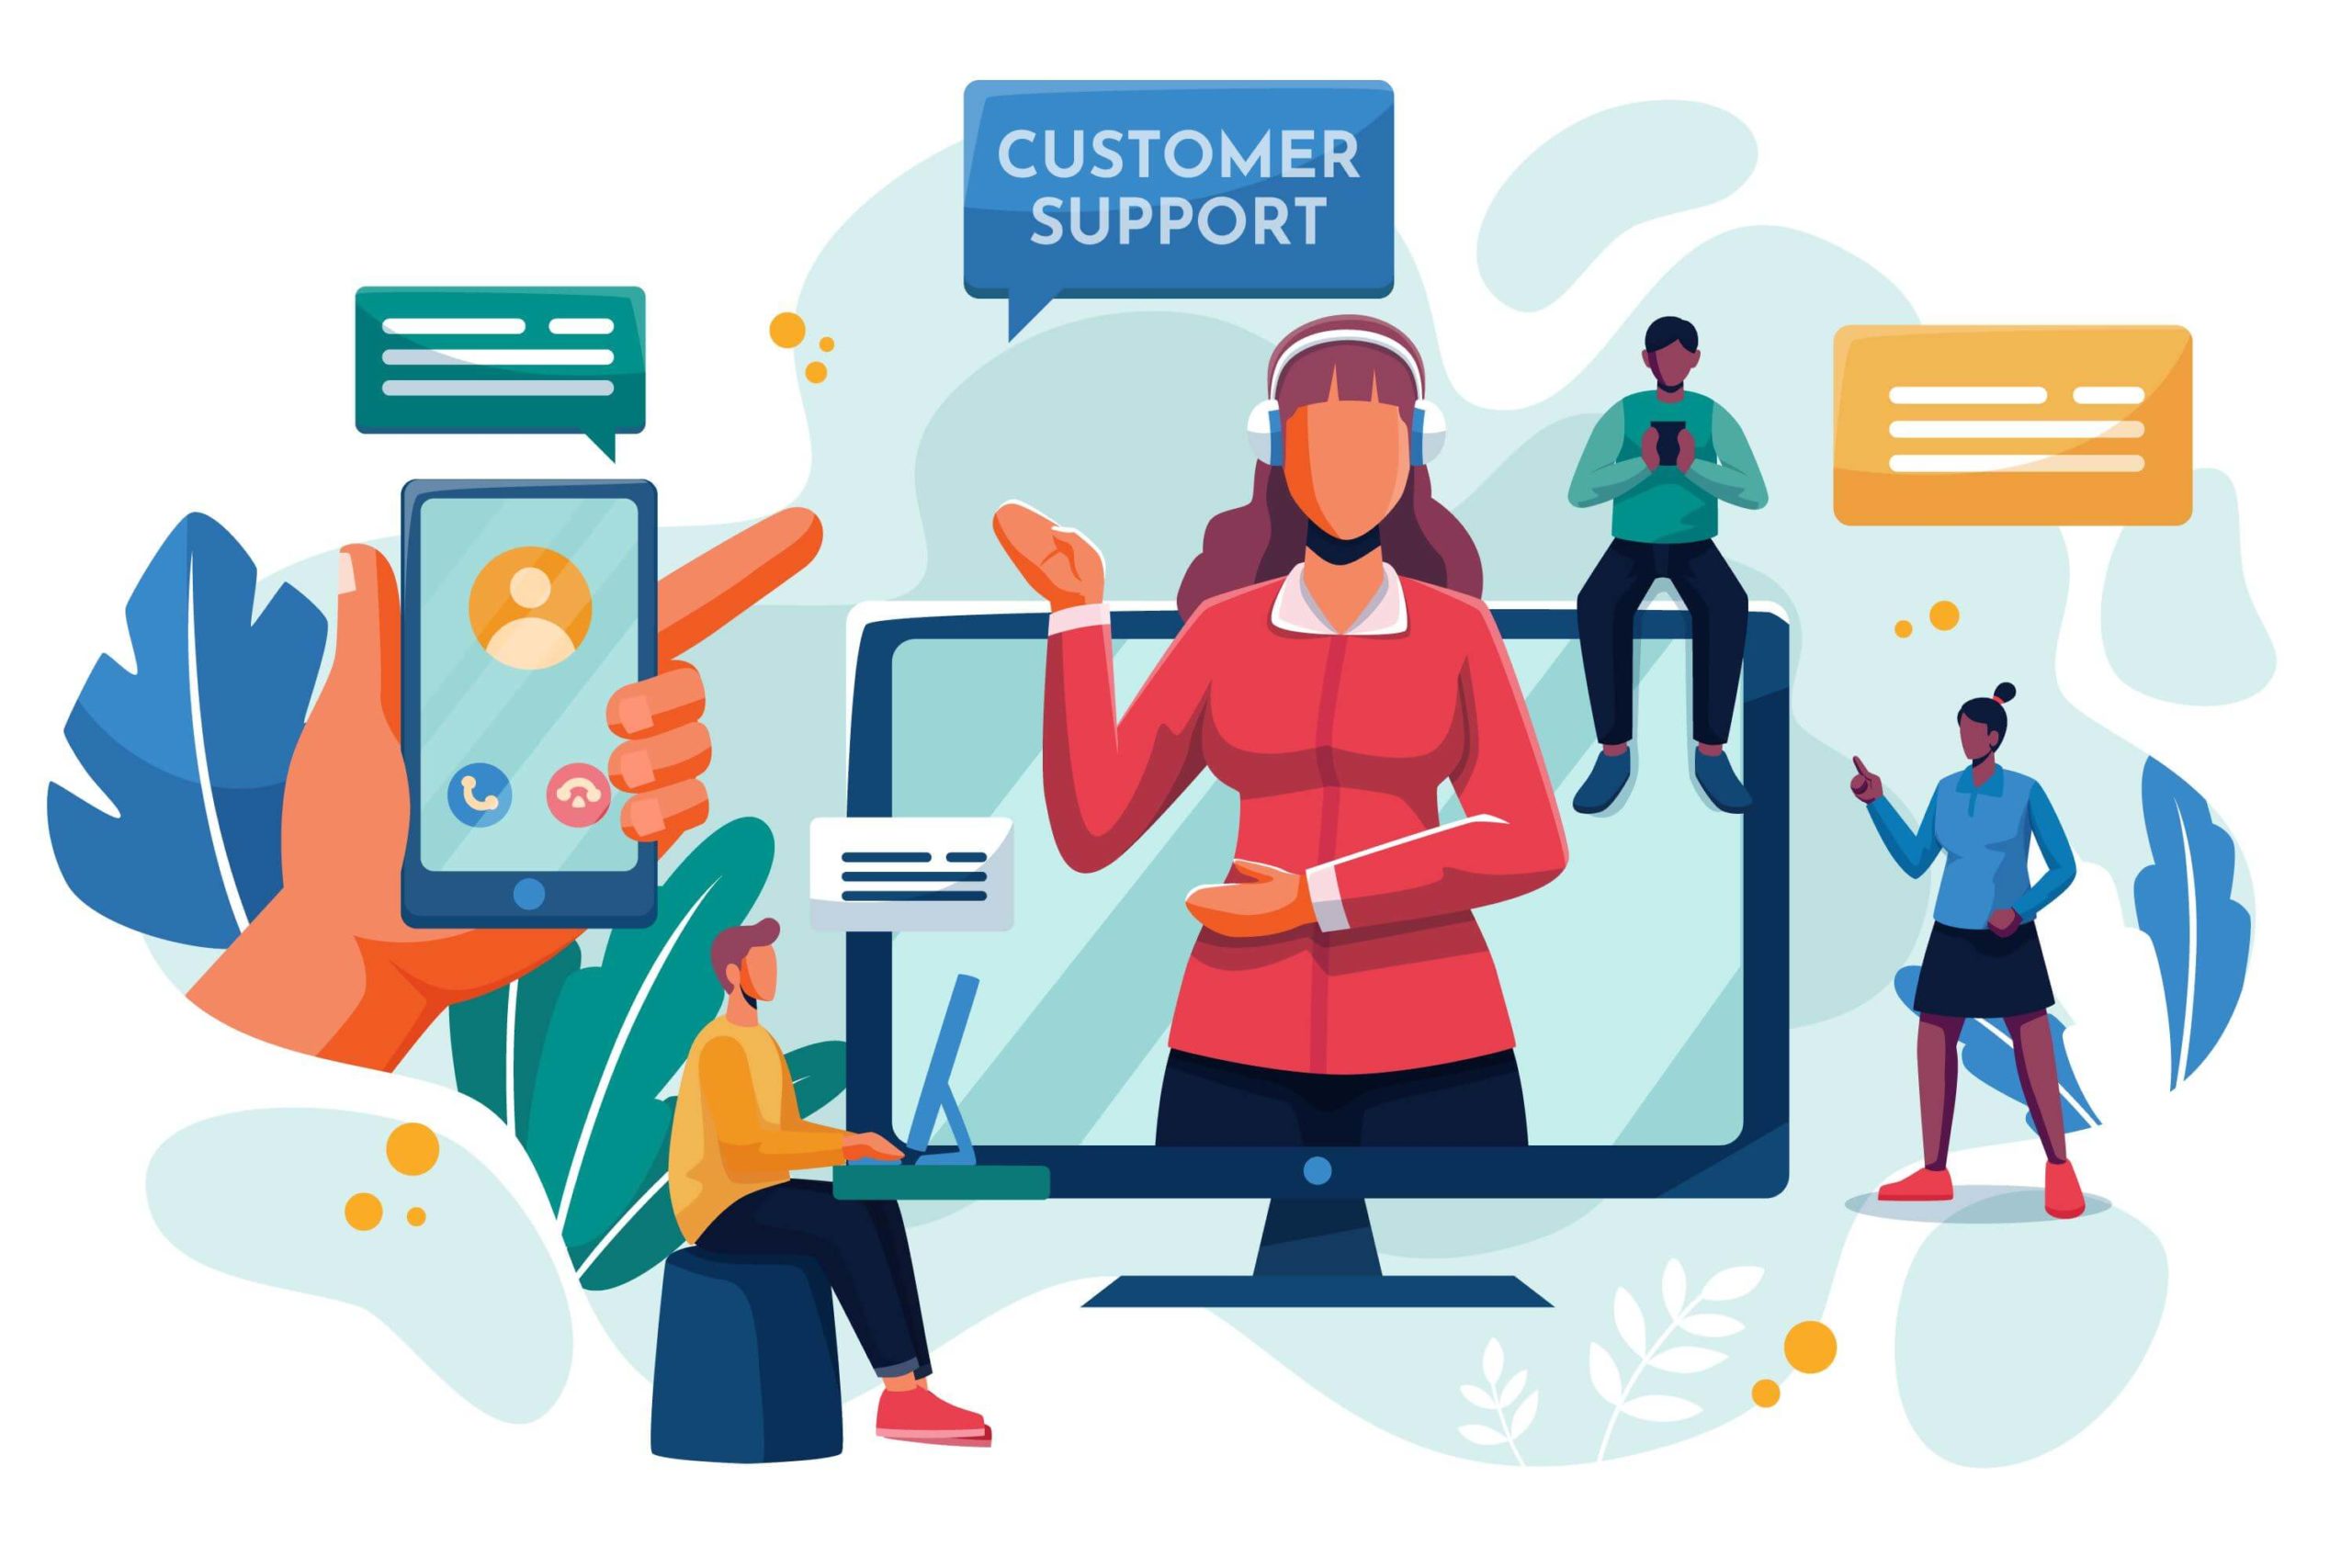 Emerging Customer Support Trends to Drive Business Growth